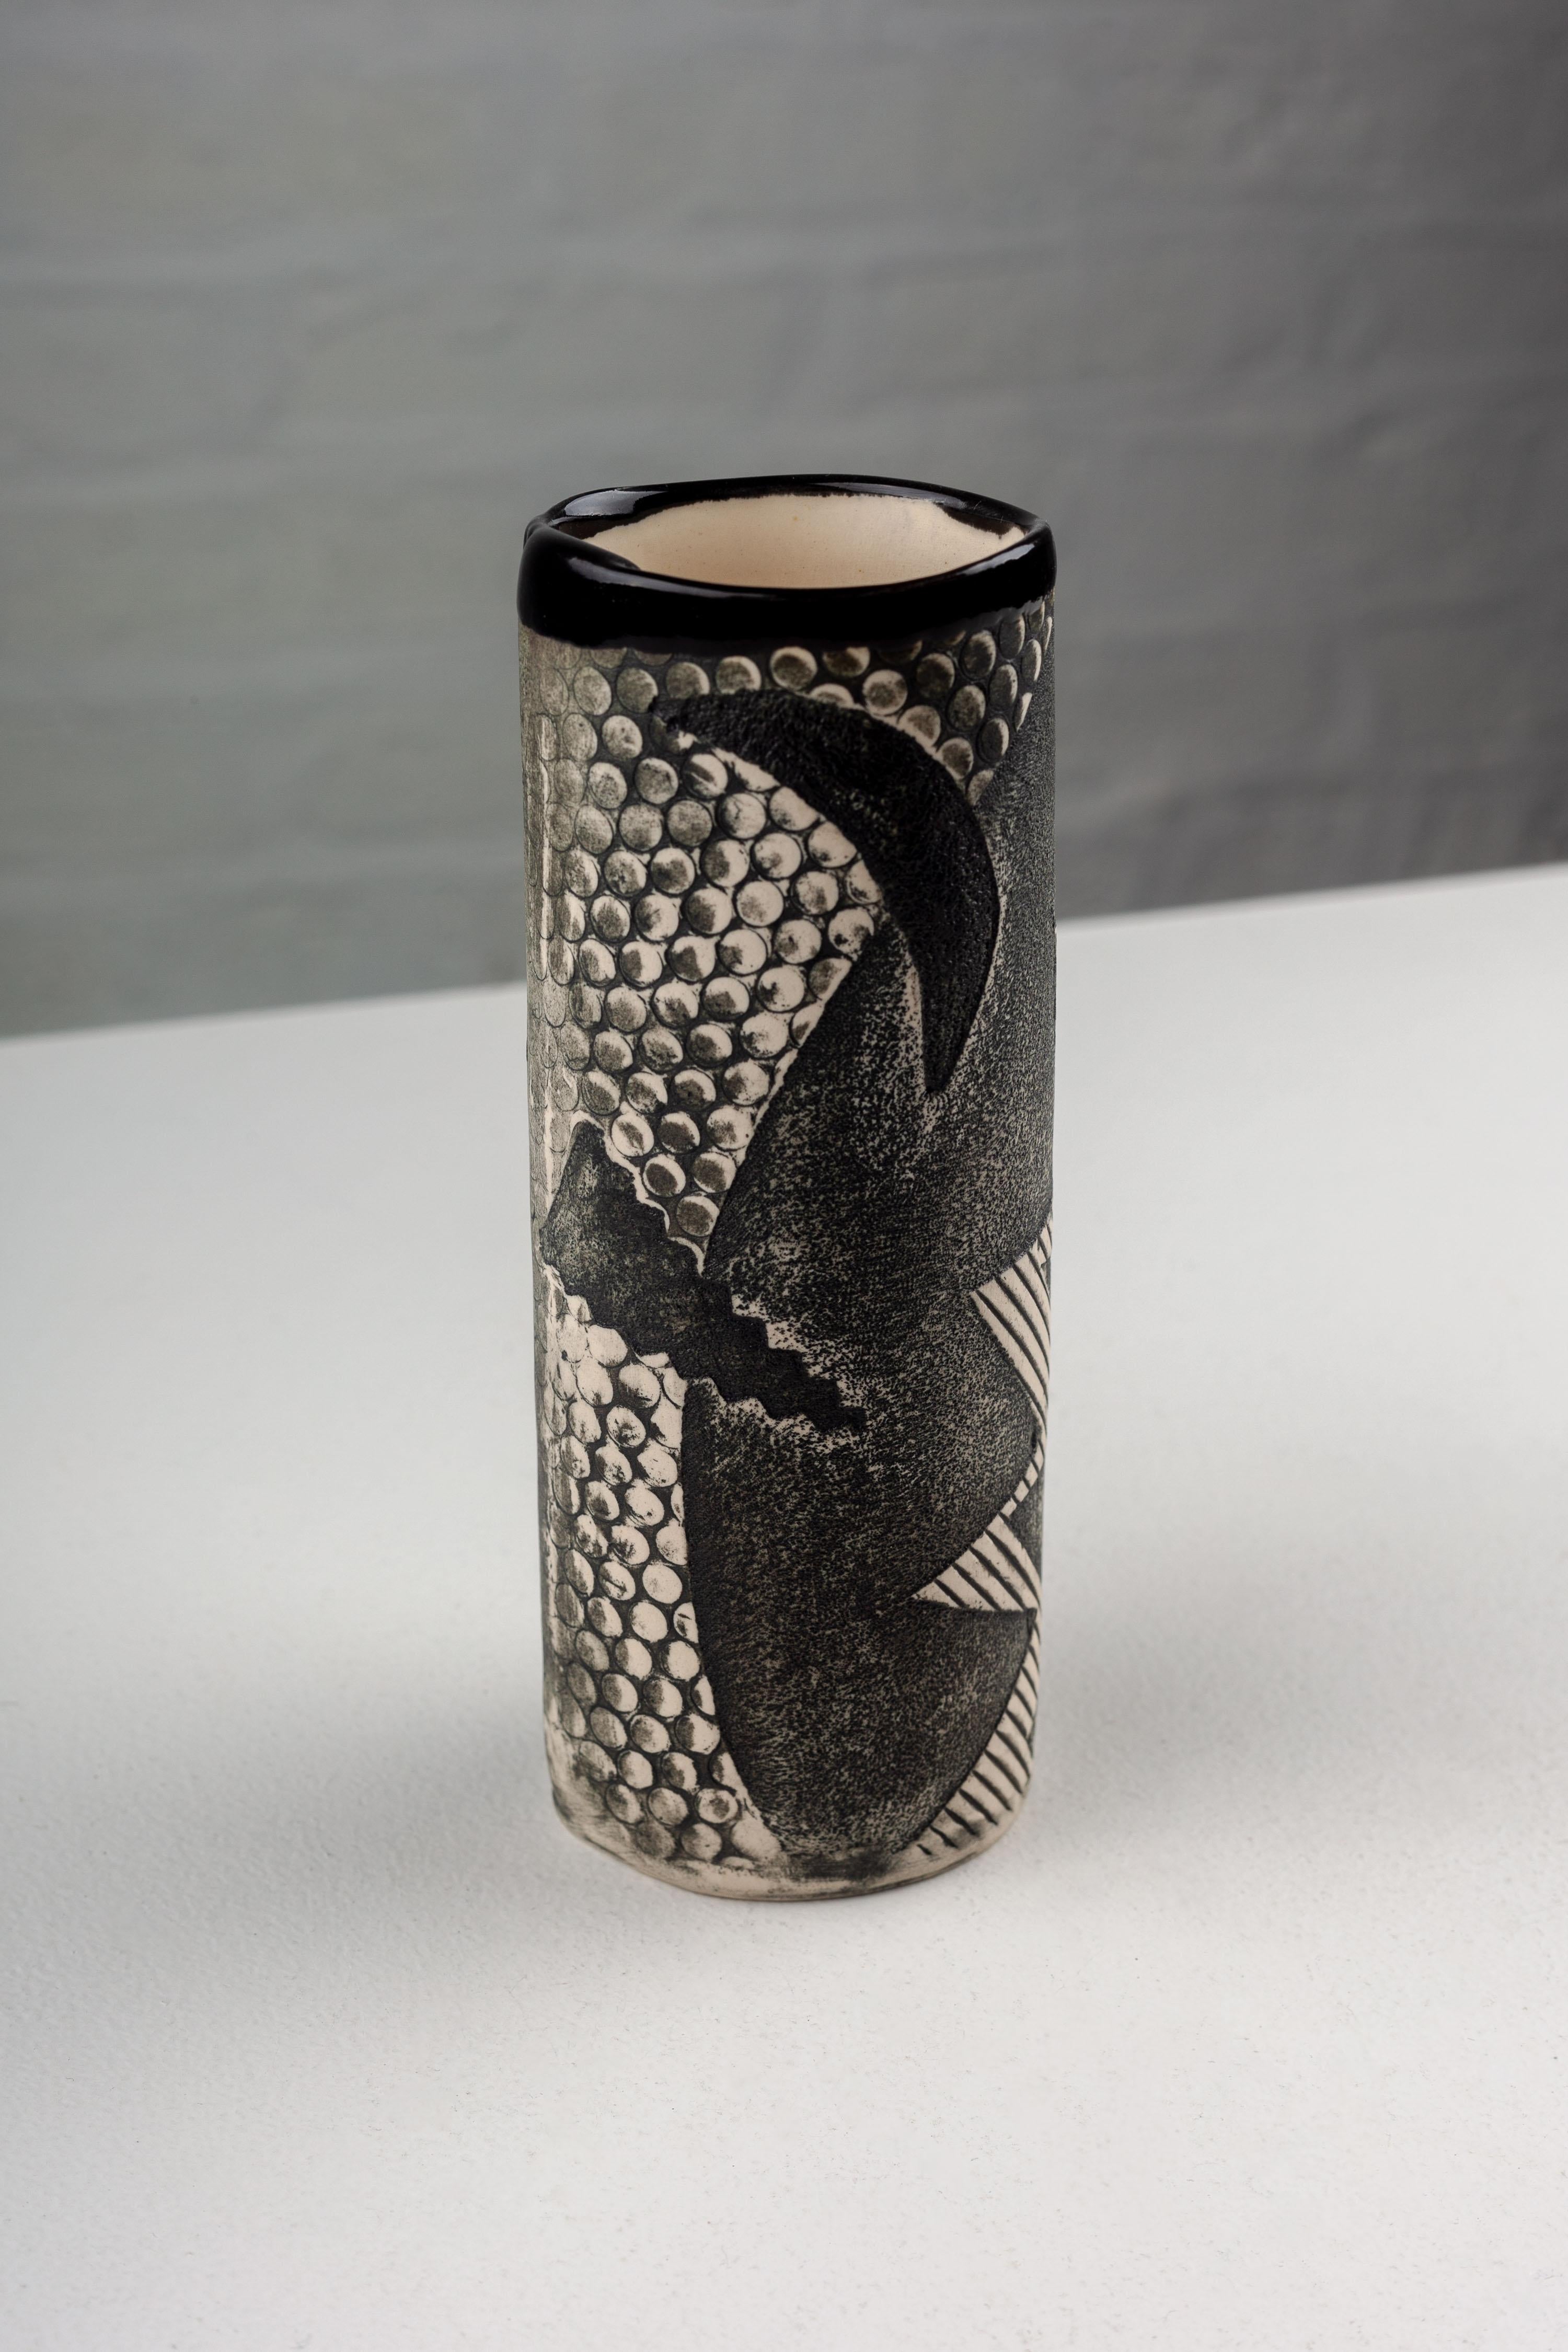 Late 20th Century Post-modern Vase Handmade by ASH WORKS High-Fired Porcelain Vase, NY USA 1991 For Sale